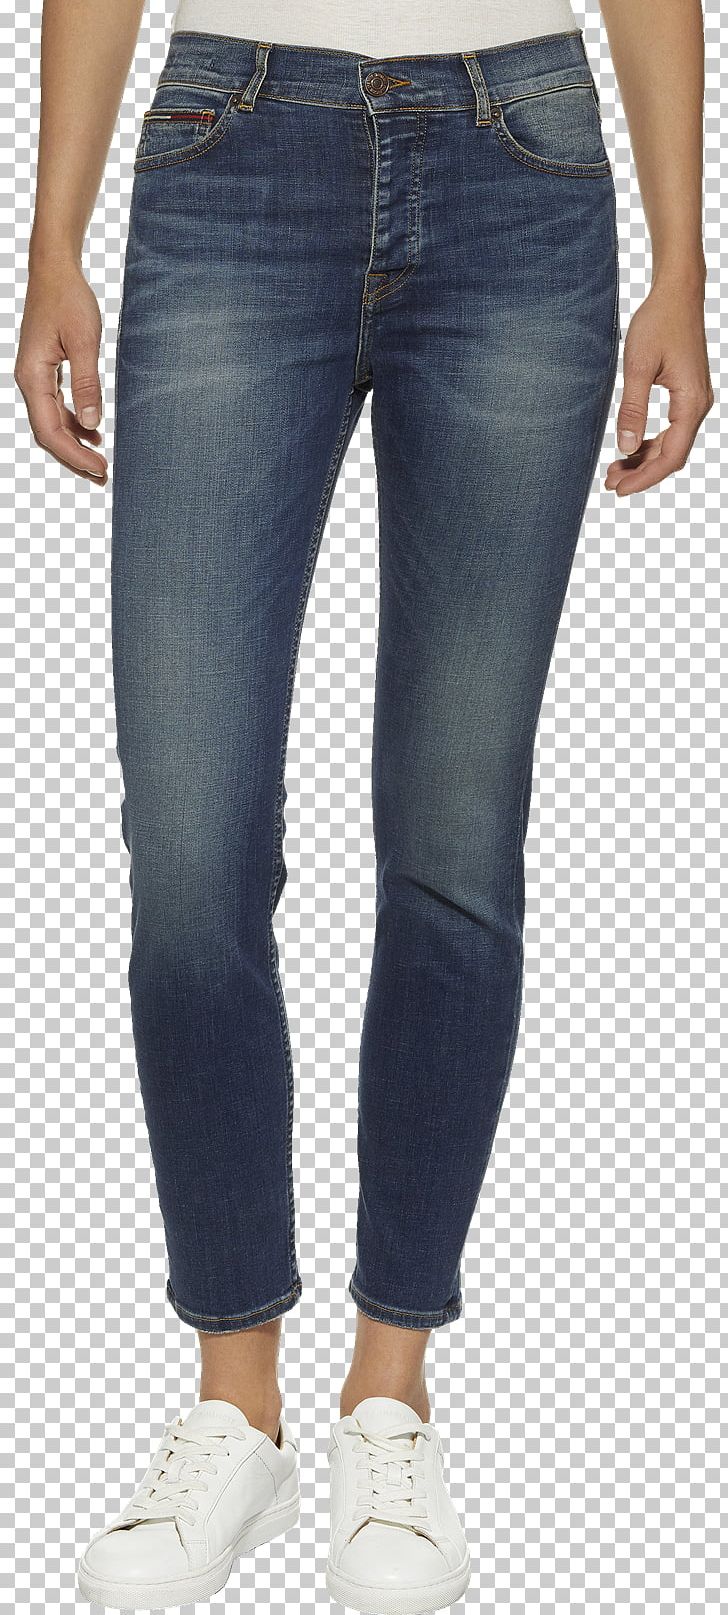 Jeans Slim-fit Pants Chino Cloth Fashion PNG, Clipart, Bestseller, Blue, Cargo Pants, Chino Cloth, Clothing Free PNG Download